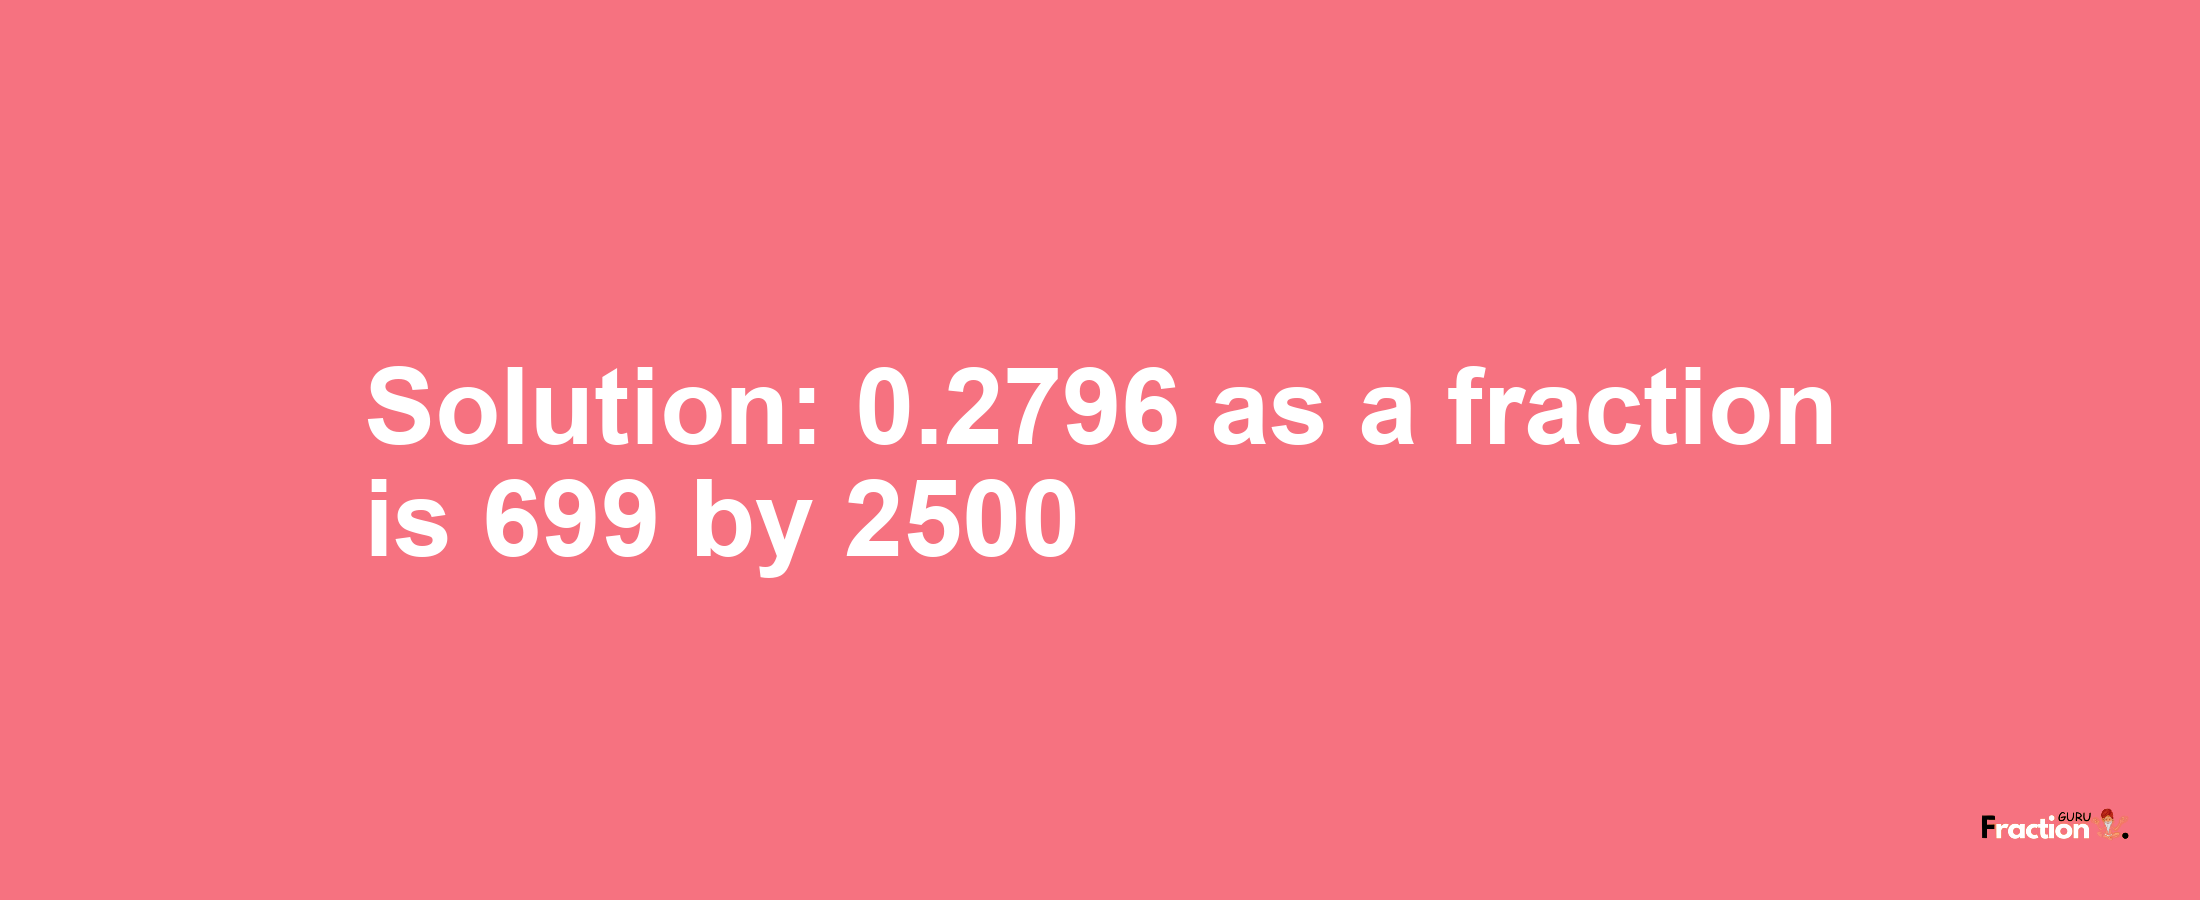 Solution:0.2796 as a fraction is 699/2500